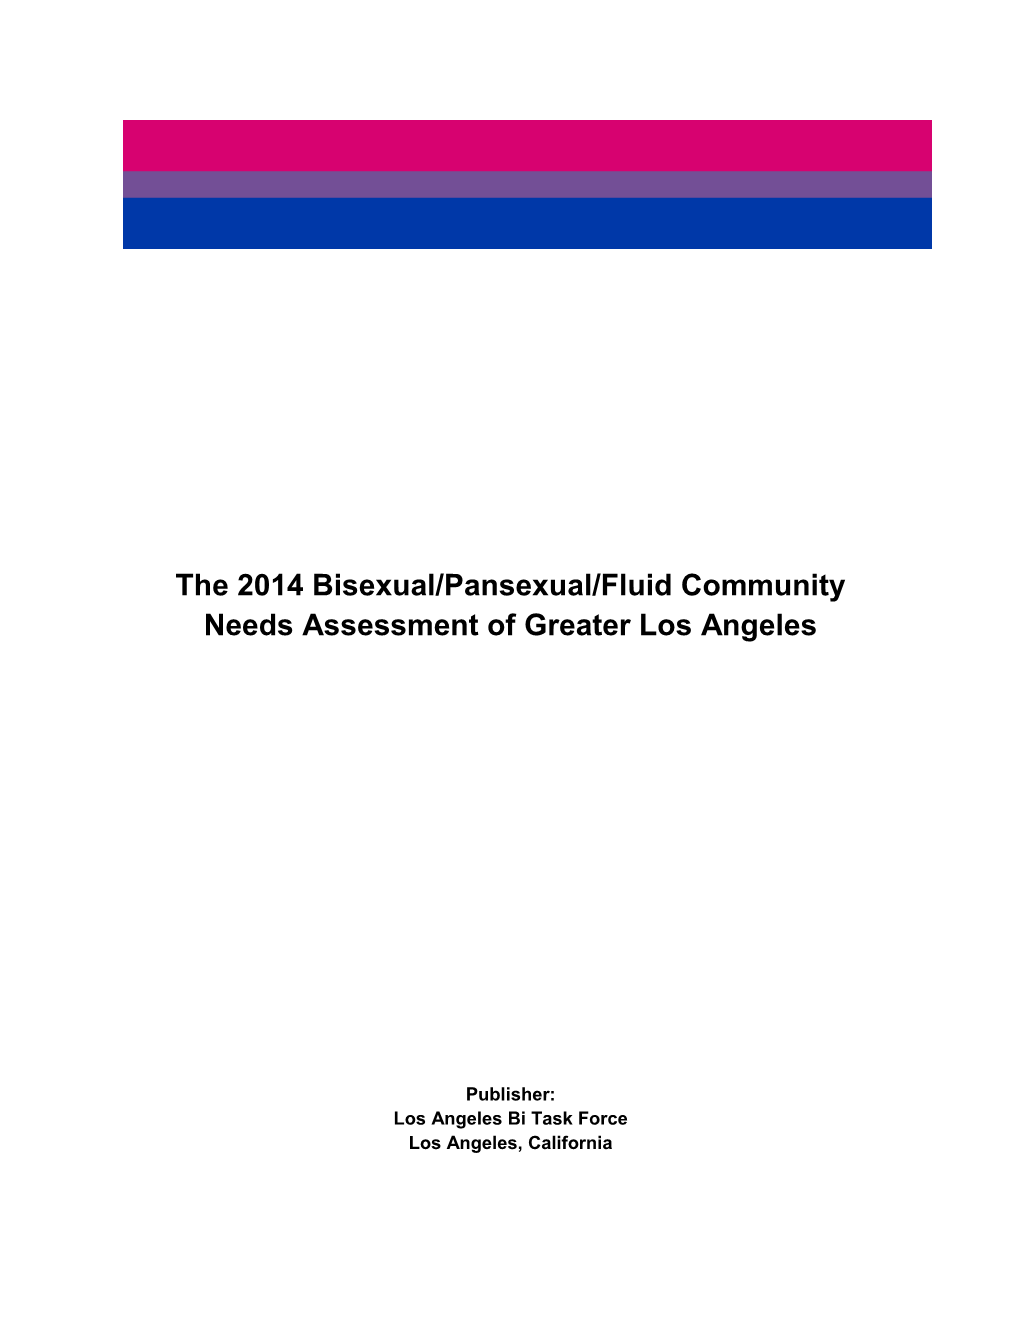 The 2014 Bisexual/Pansexual/Fluid Community Needs Assessment of Greater Los Angeles